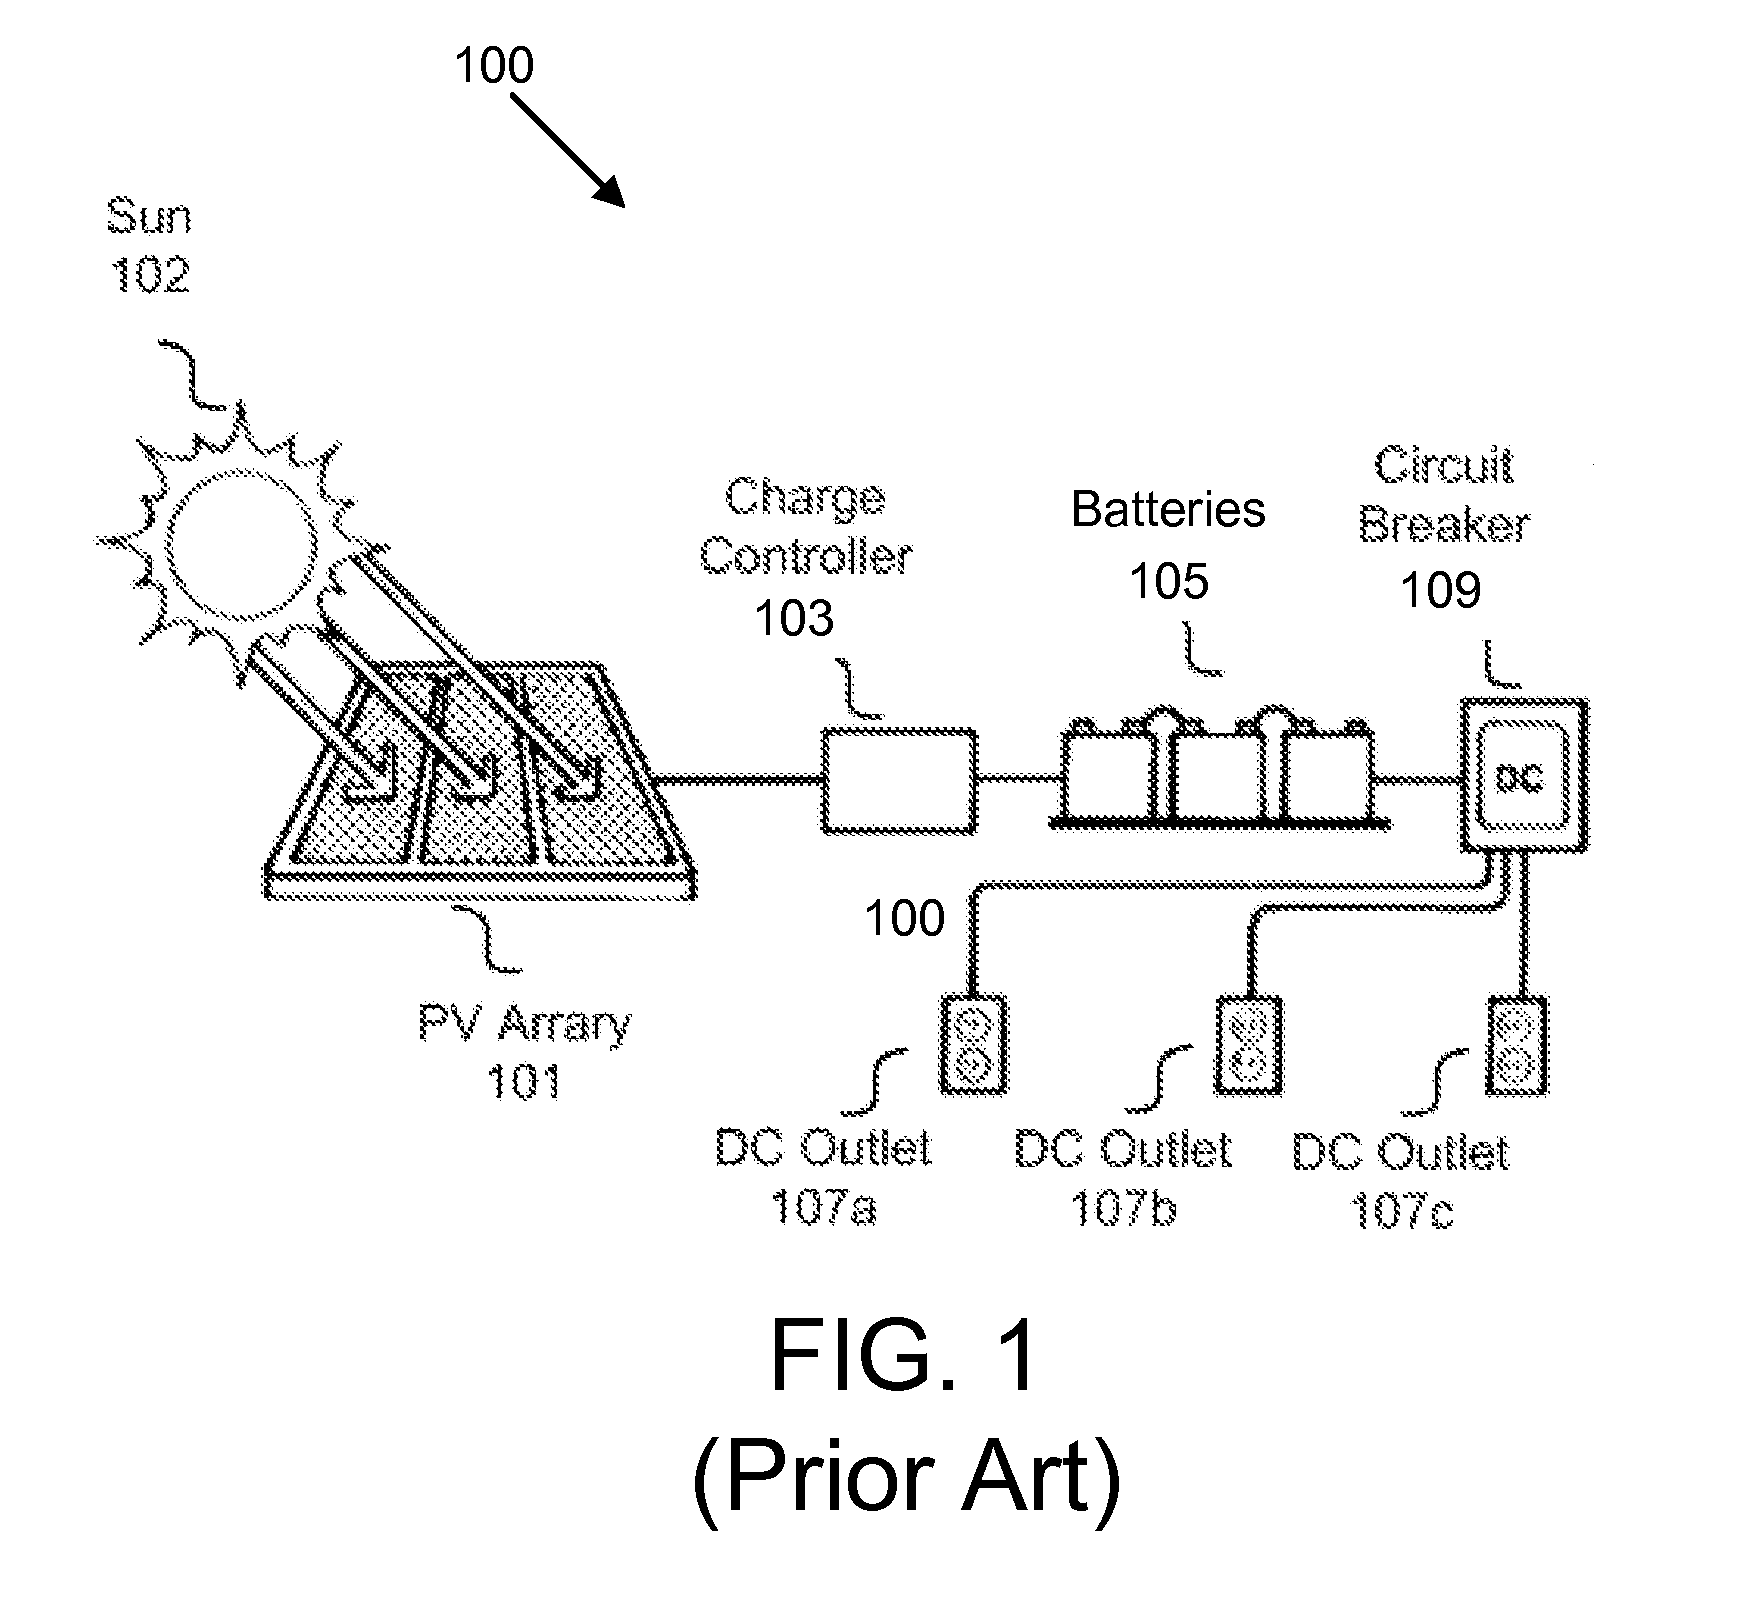 Apparatus and method for levitating a portable solar array